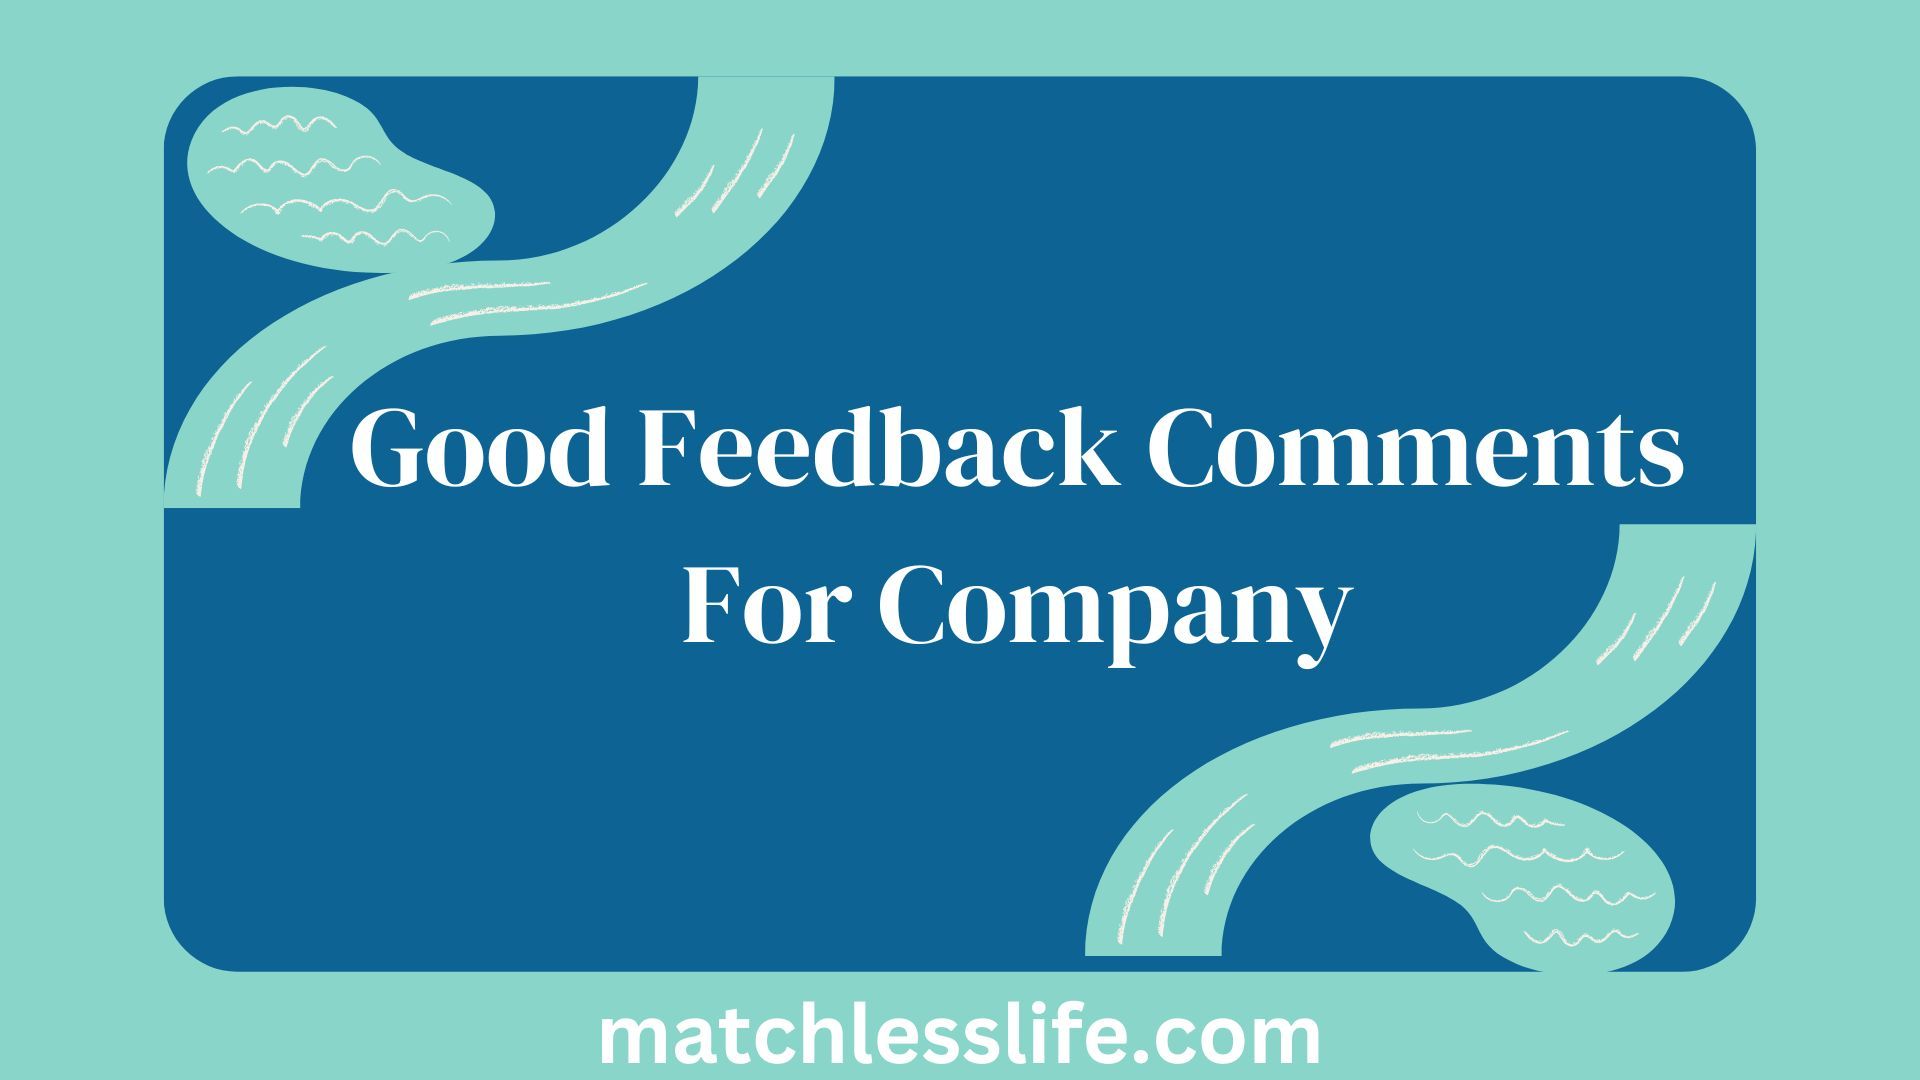 Good Feedback Comments For Company